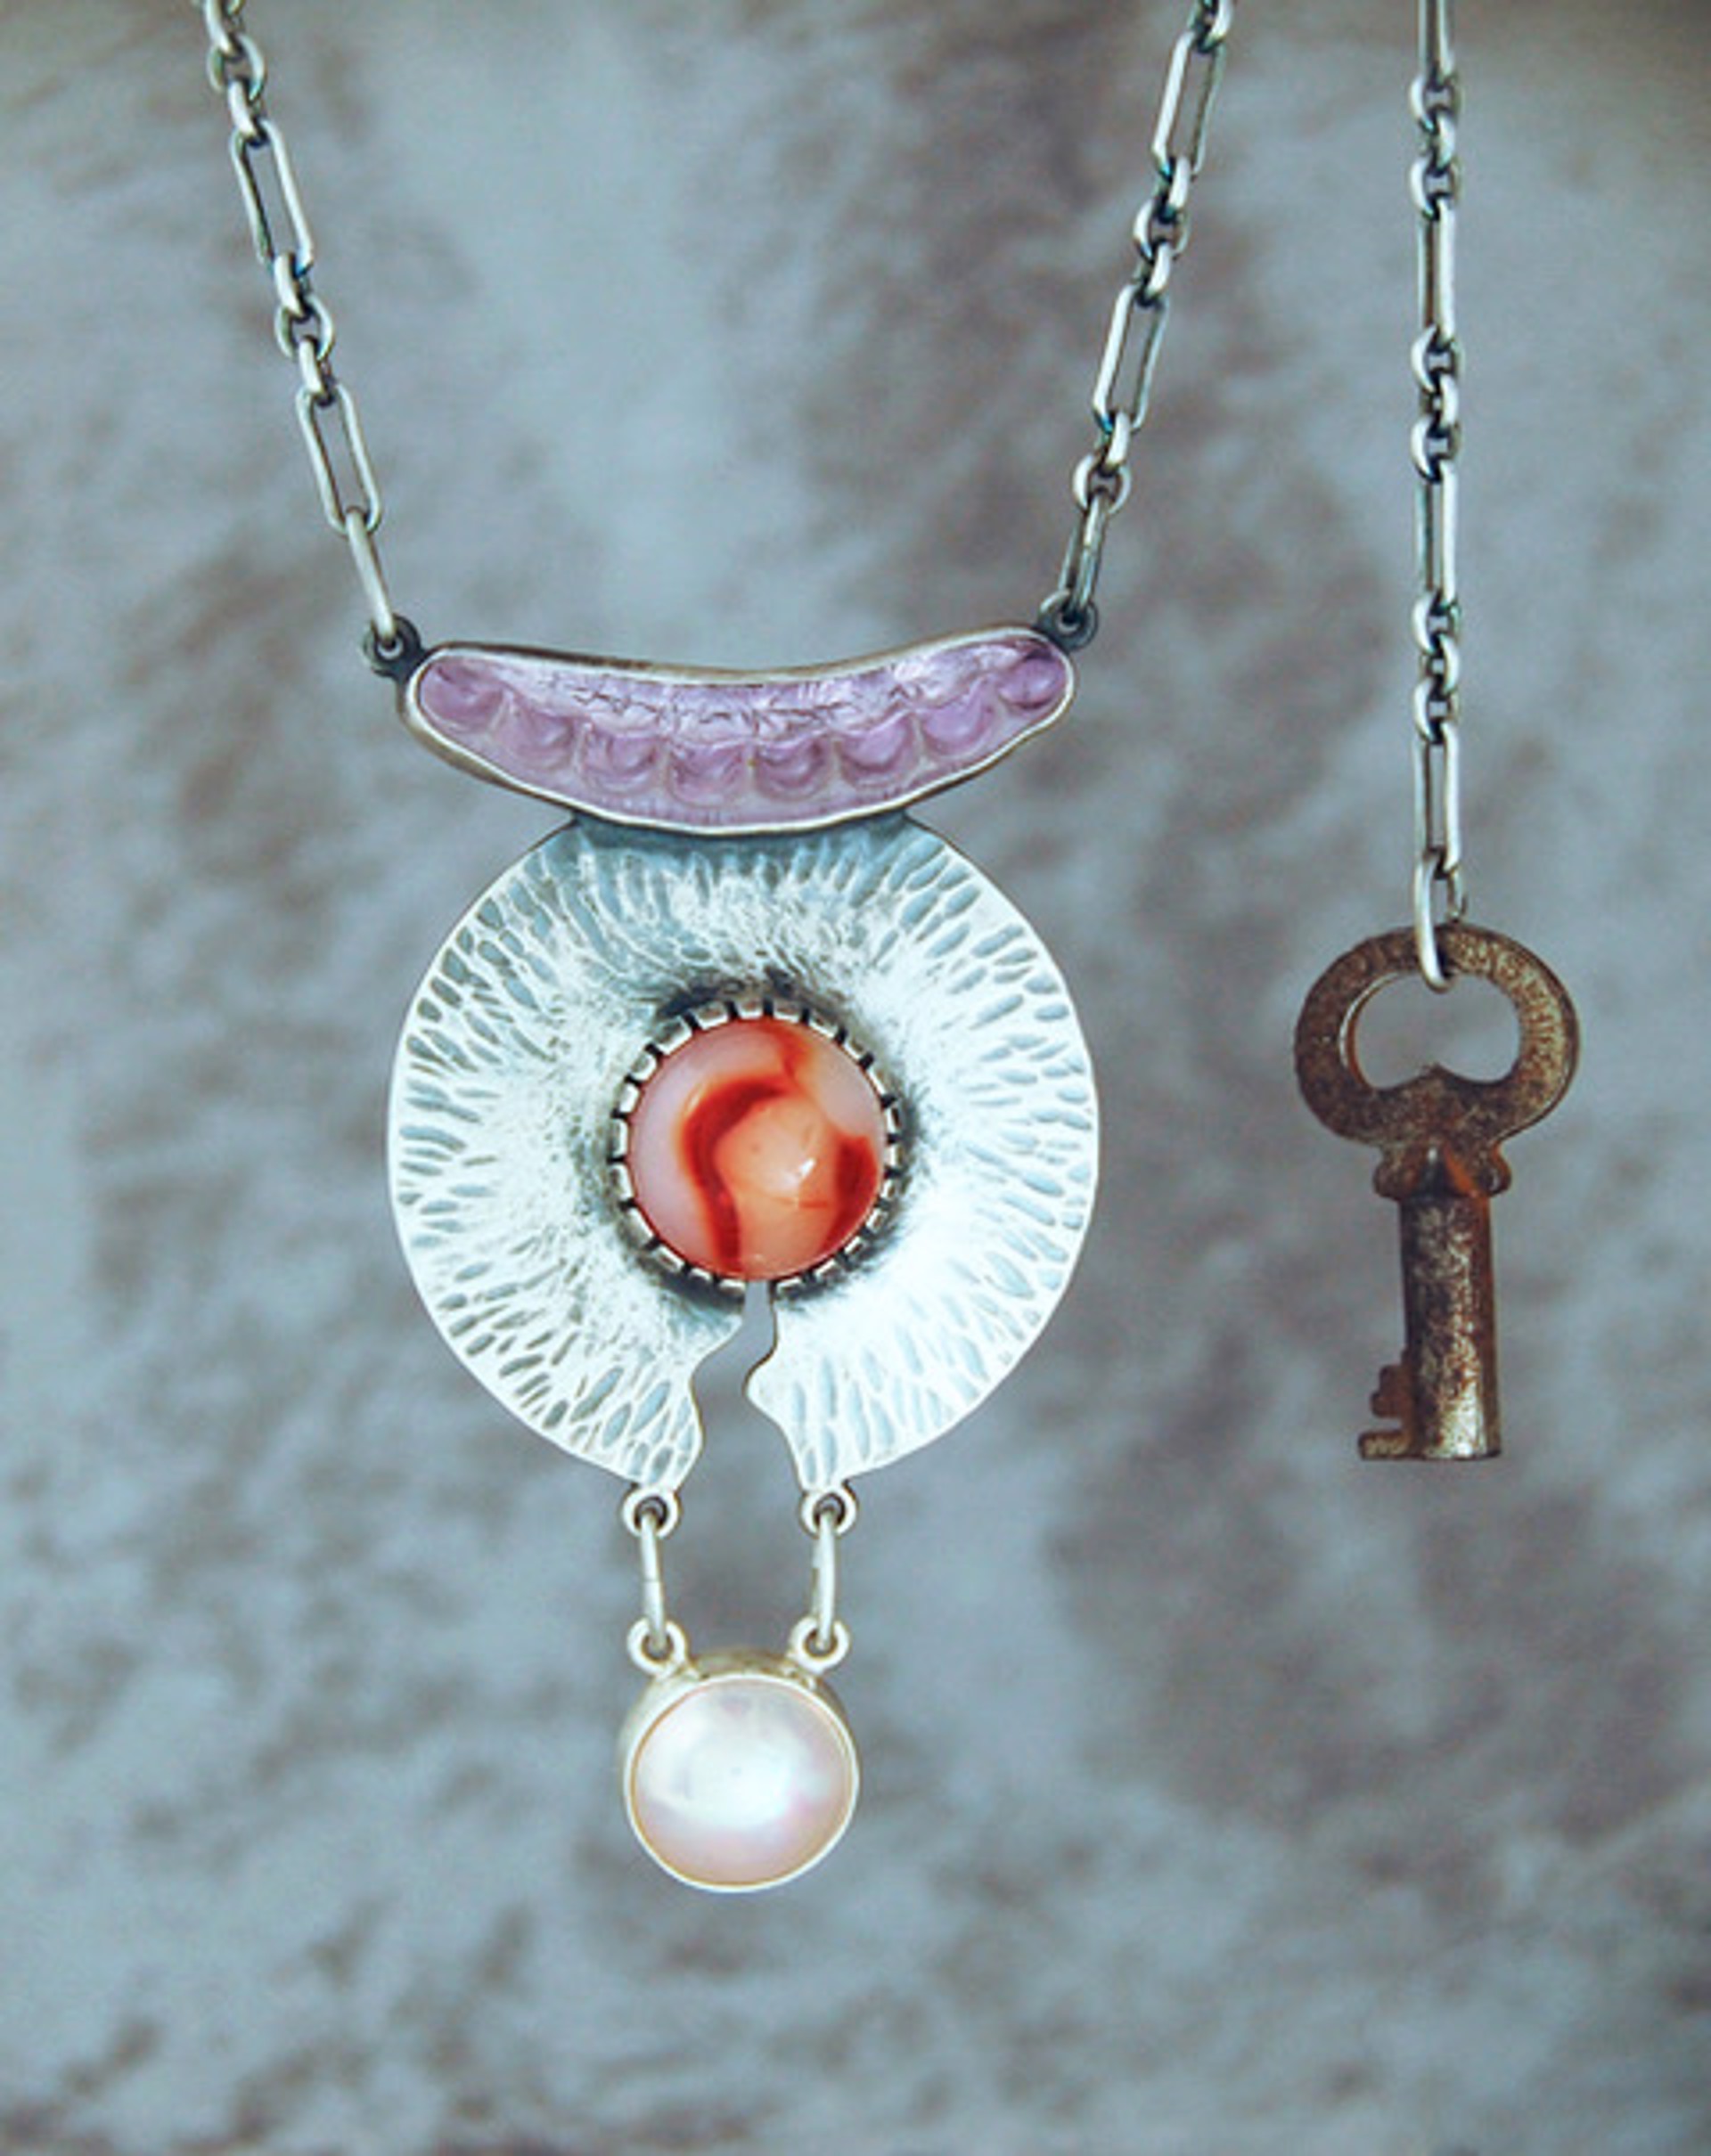 Pendant - "A Day In The Life" - Purple Desert Glass Shard, Glass Marble, Key, Mabe Pearl With Sterling Silver - 18" Chain - #307 by Ken and Barbara Newman